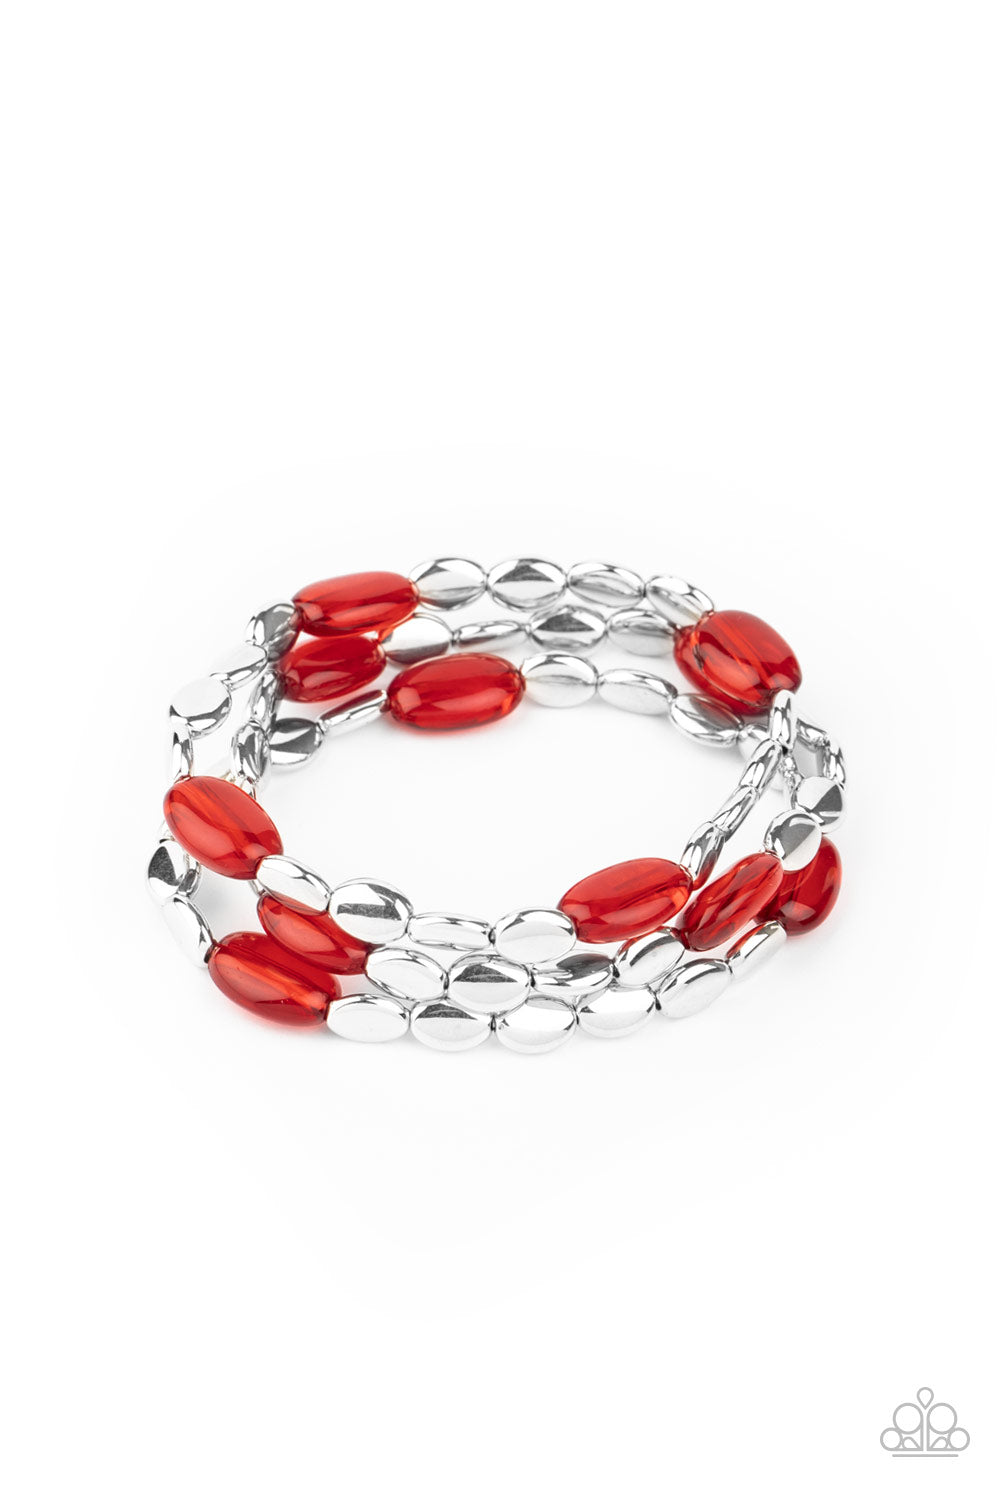 Paparazzi Bracelet - Sorry to Burst Your BAUBLE - Red